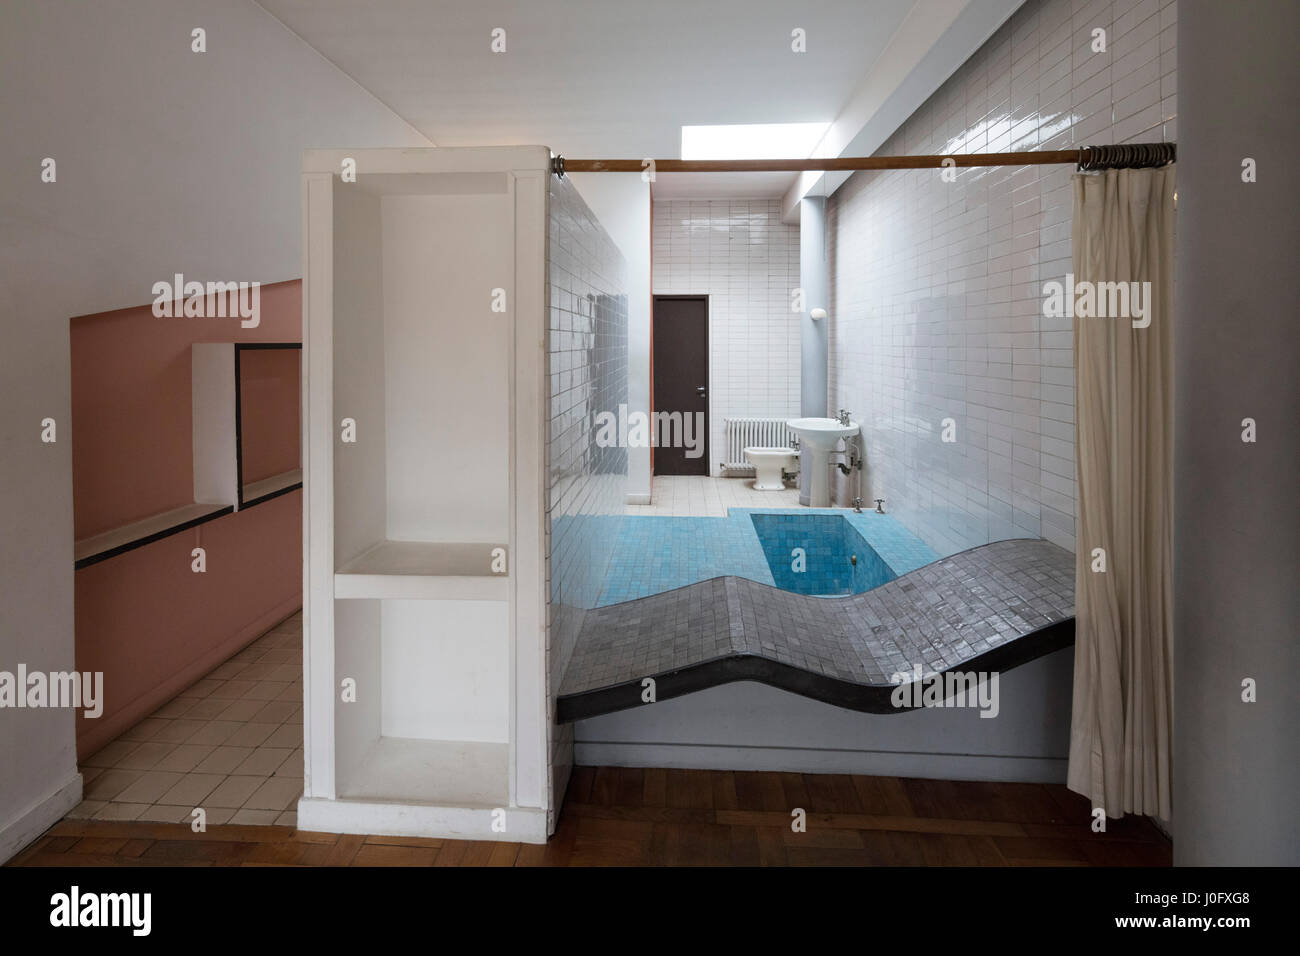 bathroom with day bed, Villa Savoye at Poissy, France, modernist architectural icon of Le Corbusier Stock Photo